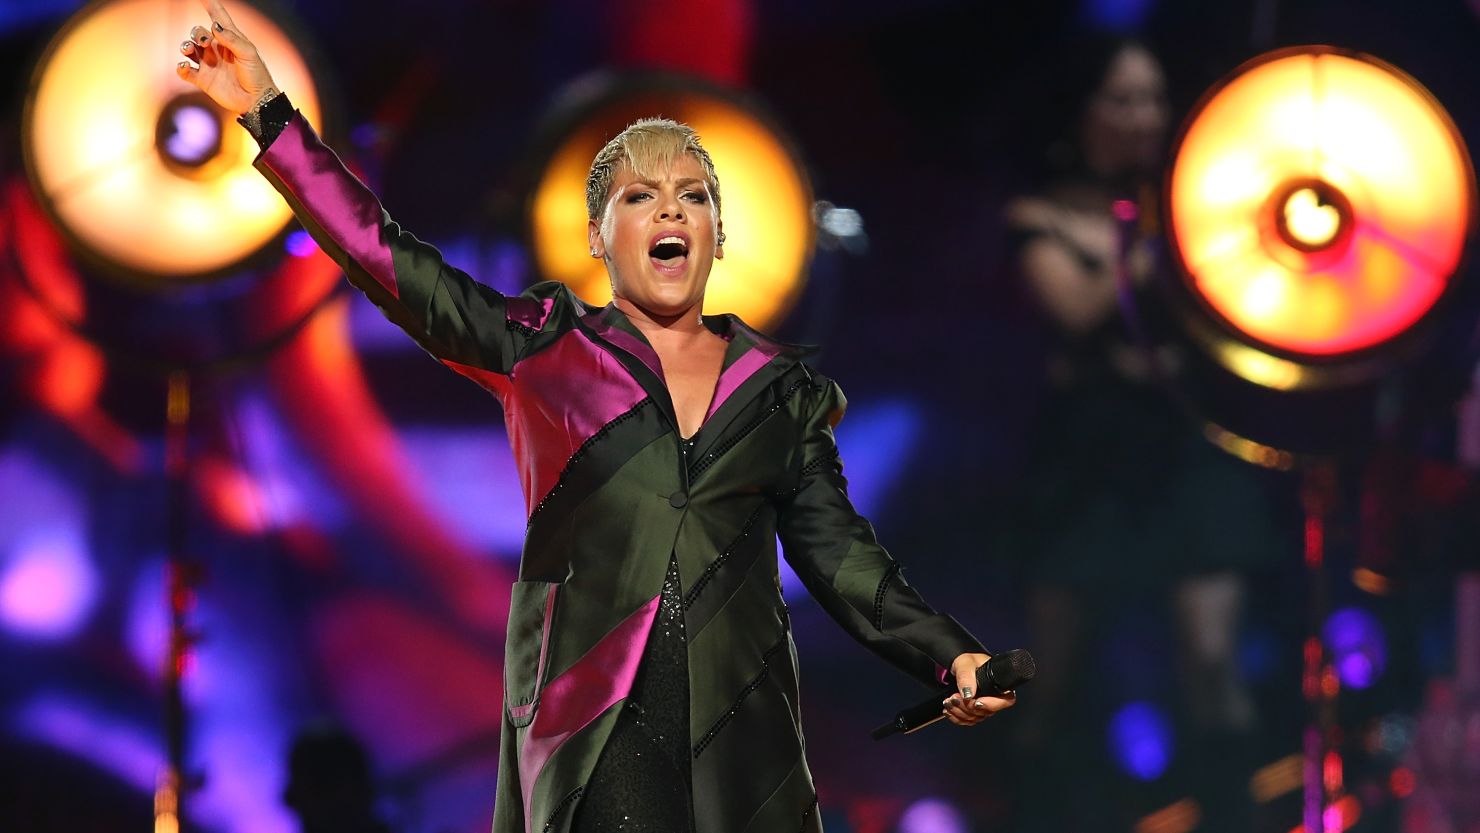 Pink performs on stage at Perth Arena on July 3, 2018 in Perth, Australia.  (Photo by Paul Kane/Getty Images)